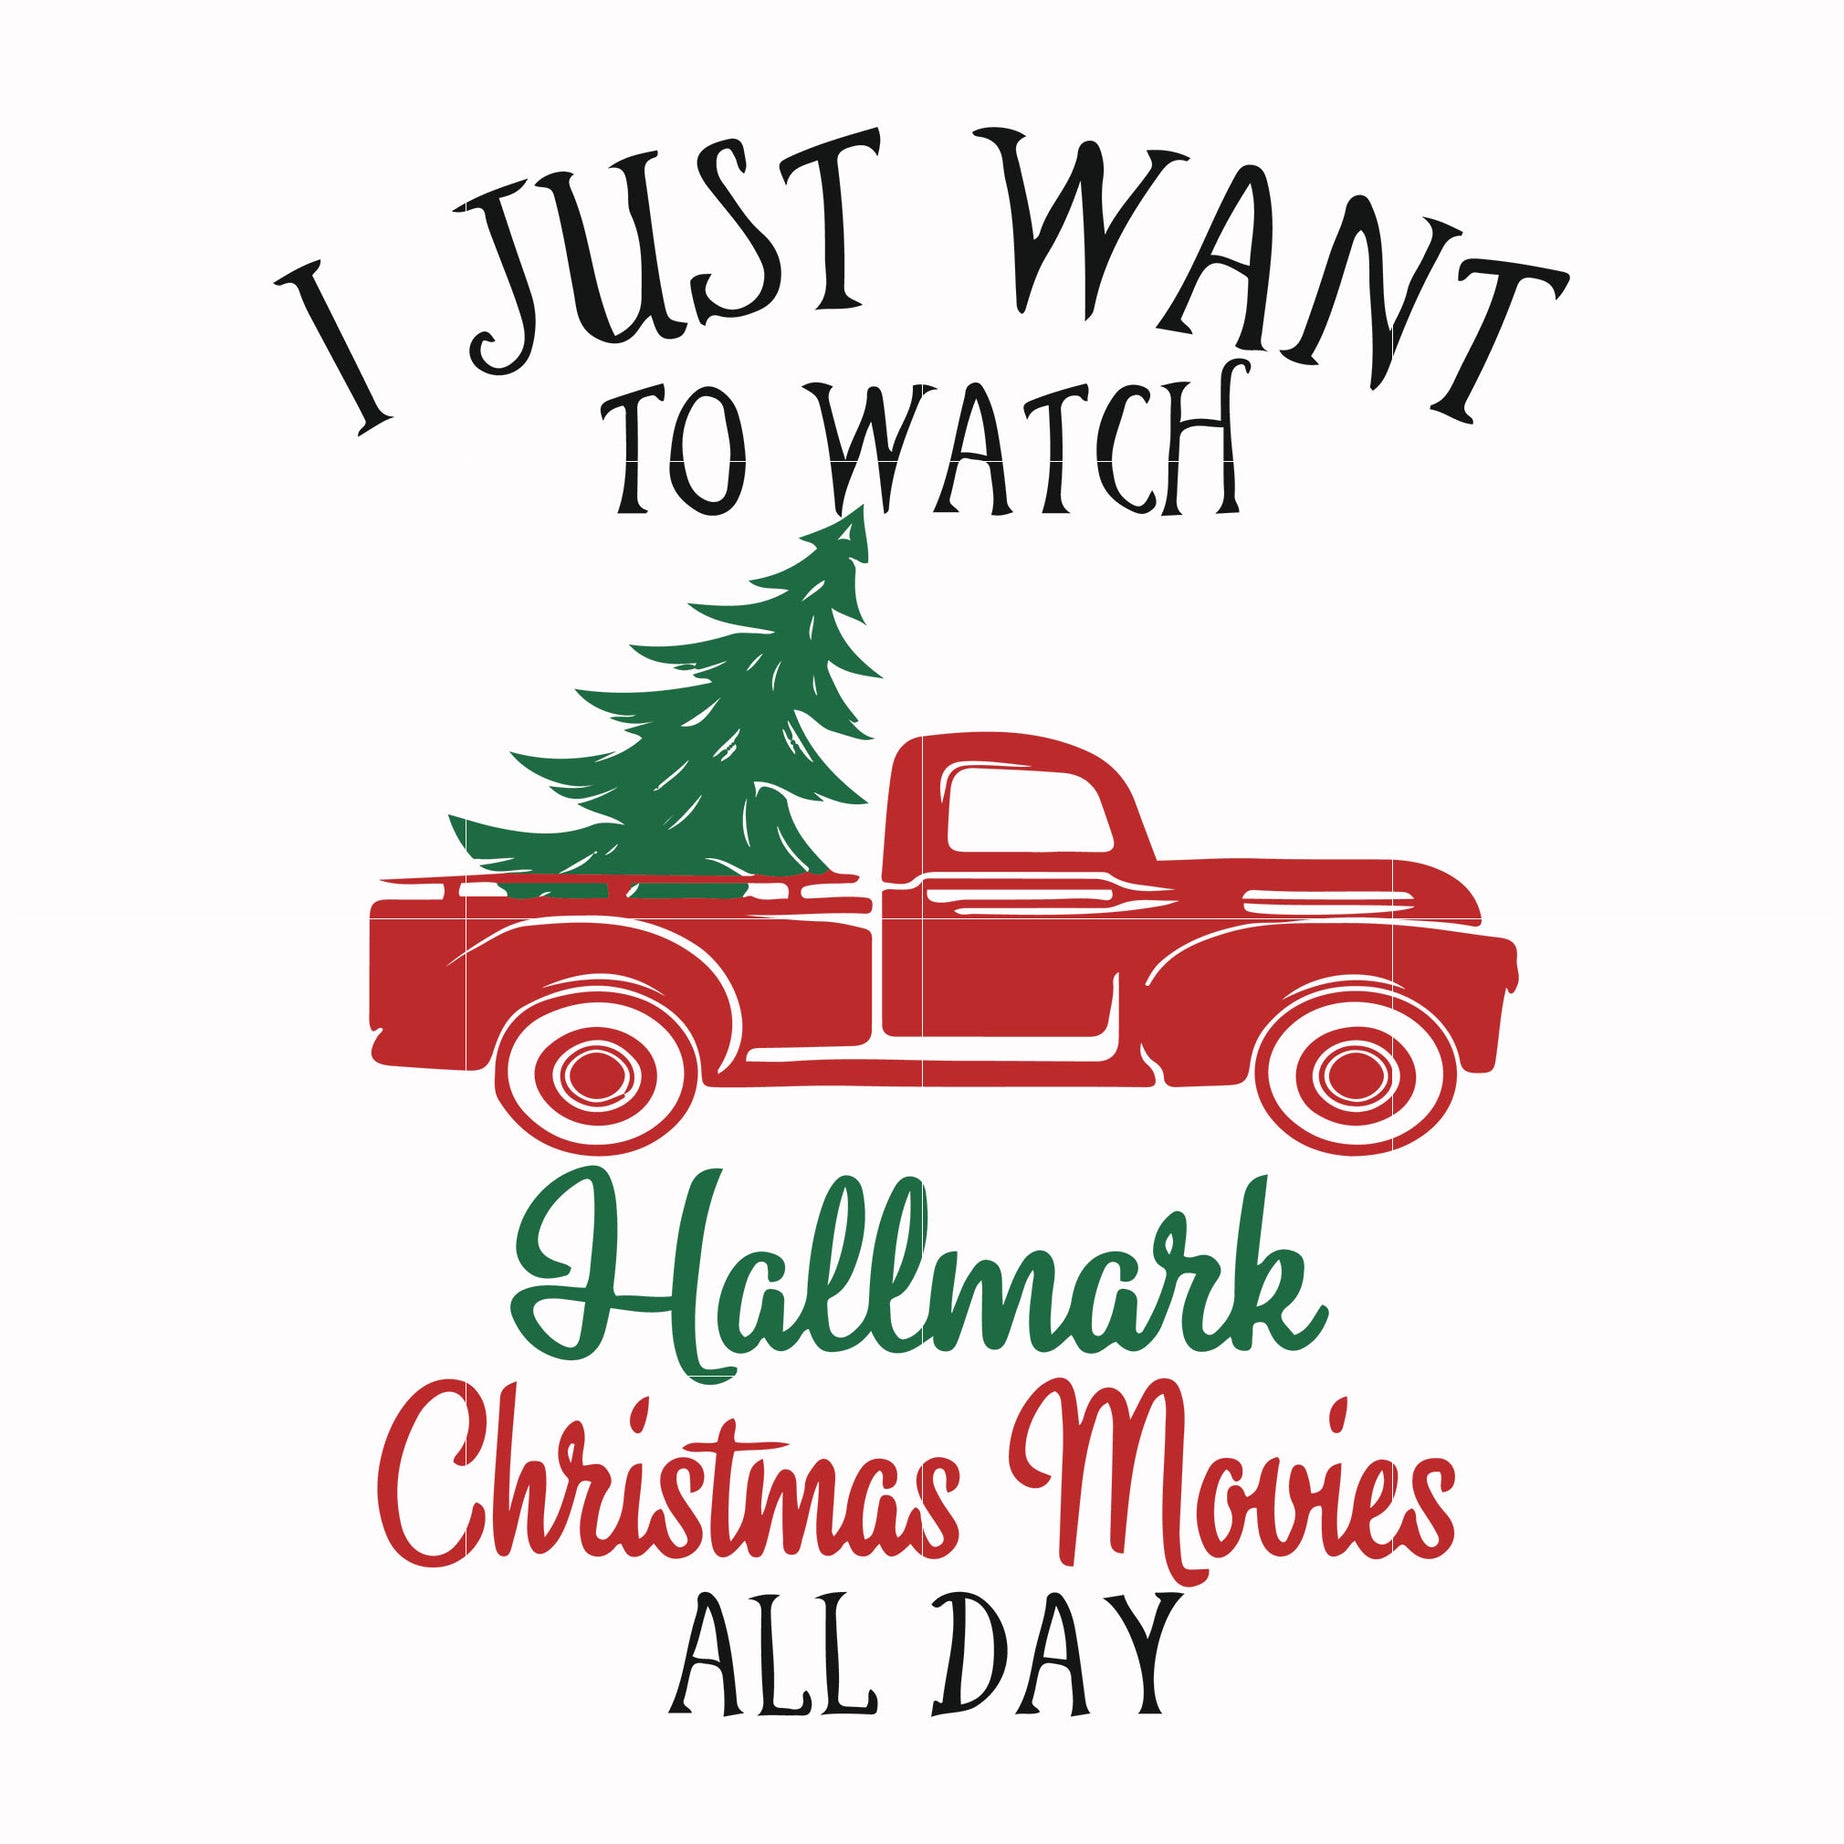 I just want to watch hallmark christmas movies all day svg, png, dxf, eps digital file NCRM15072014